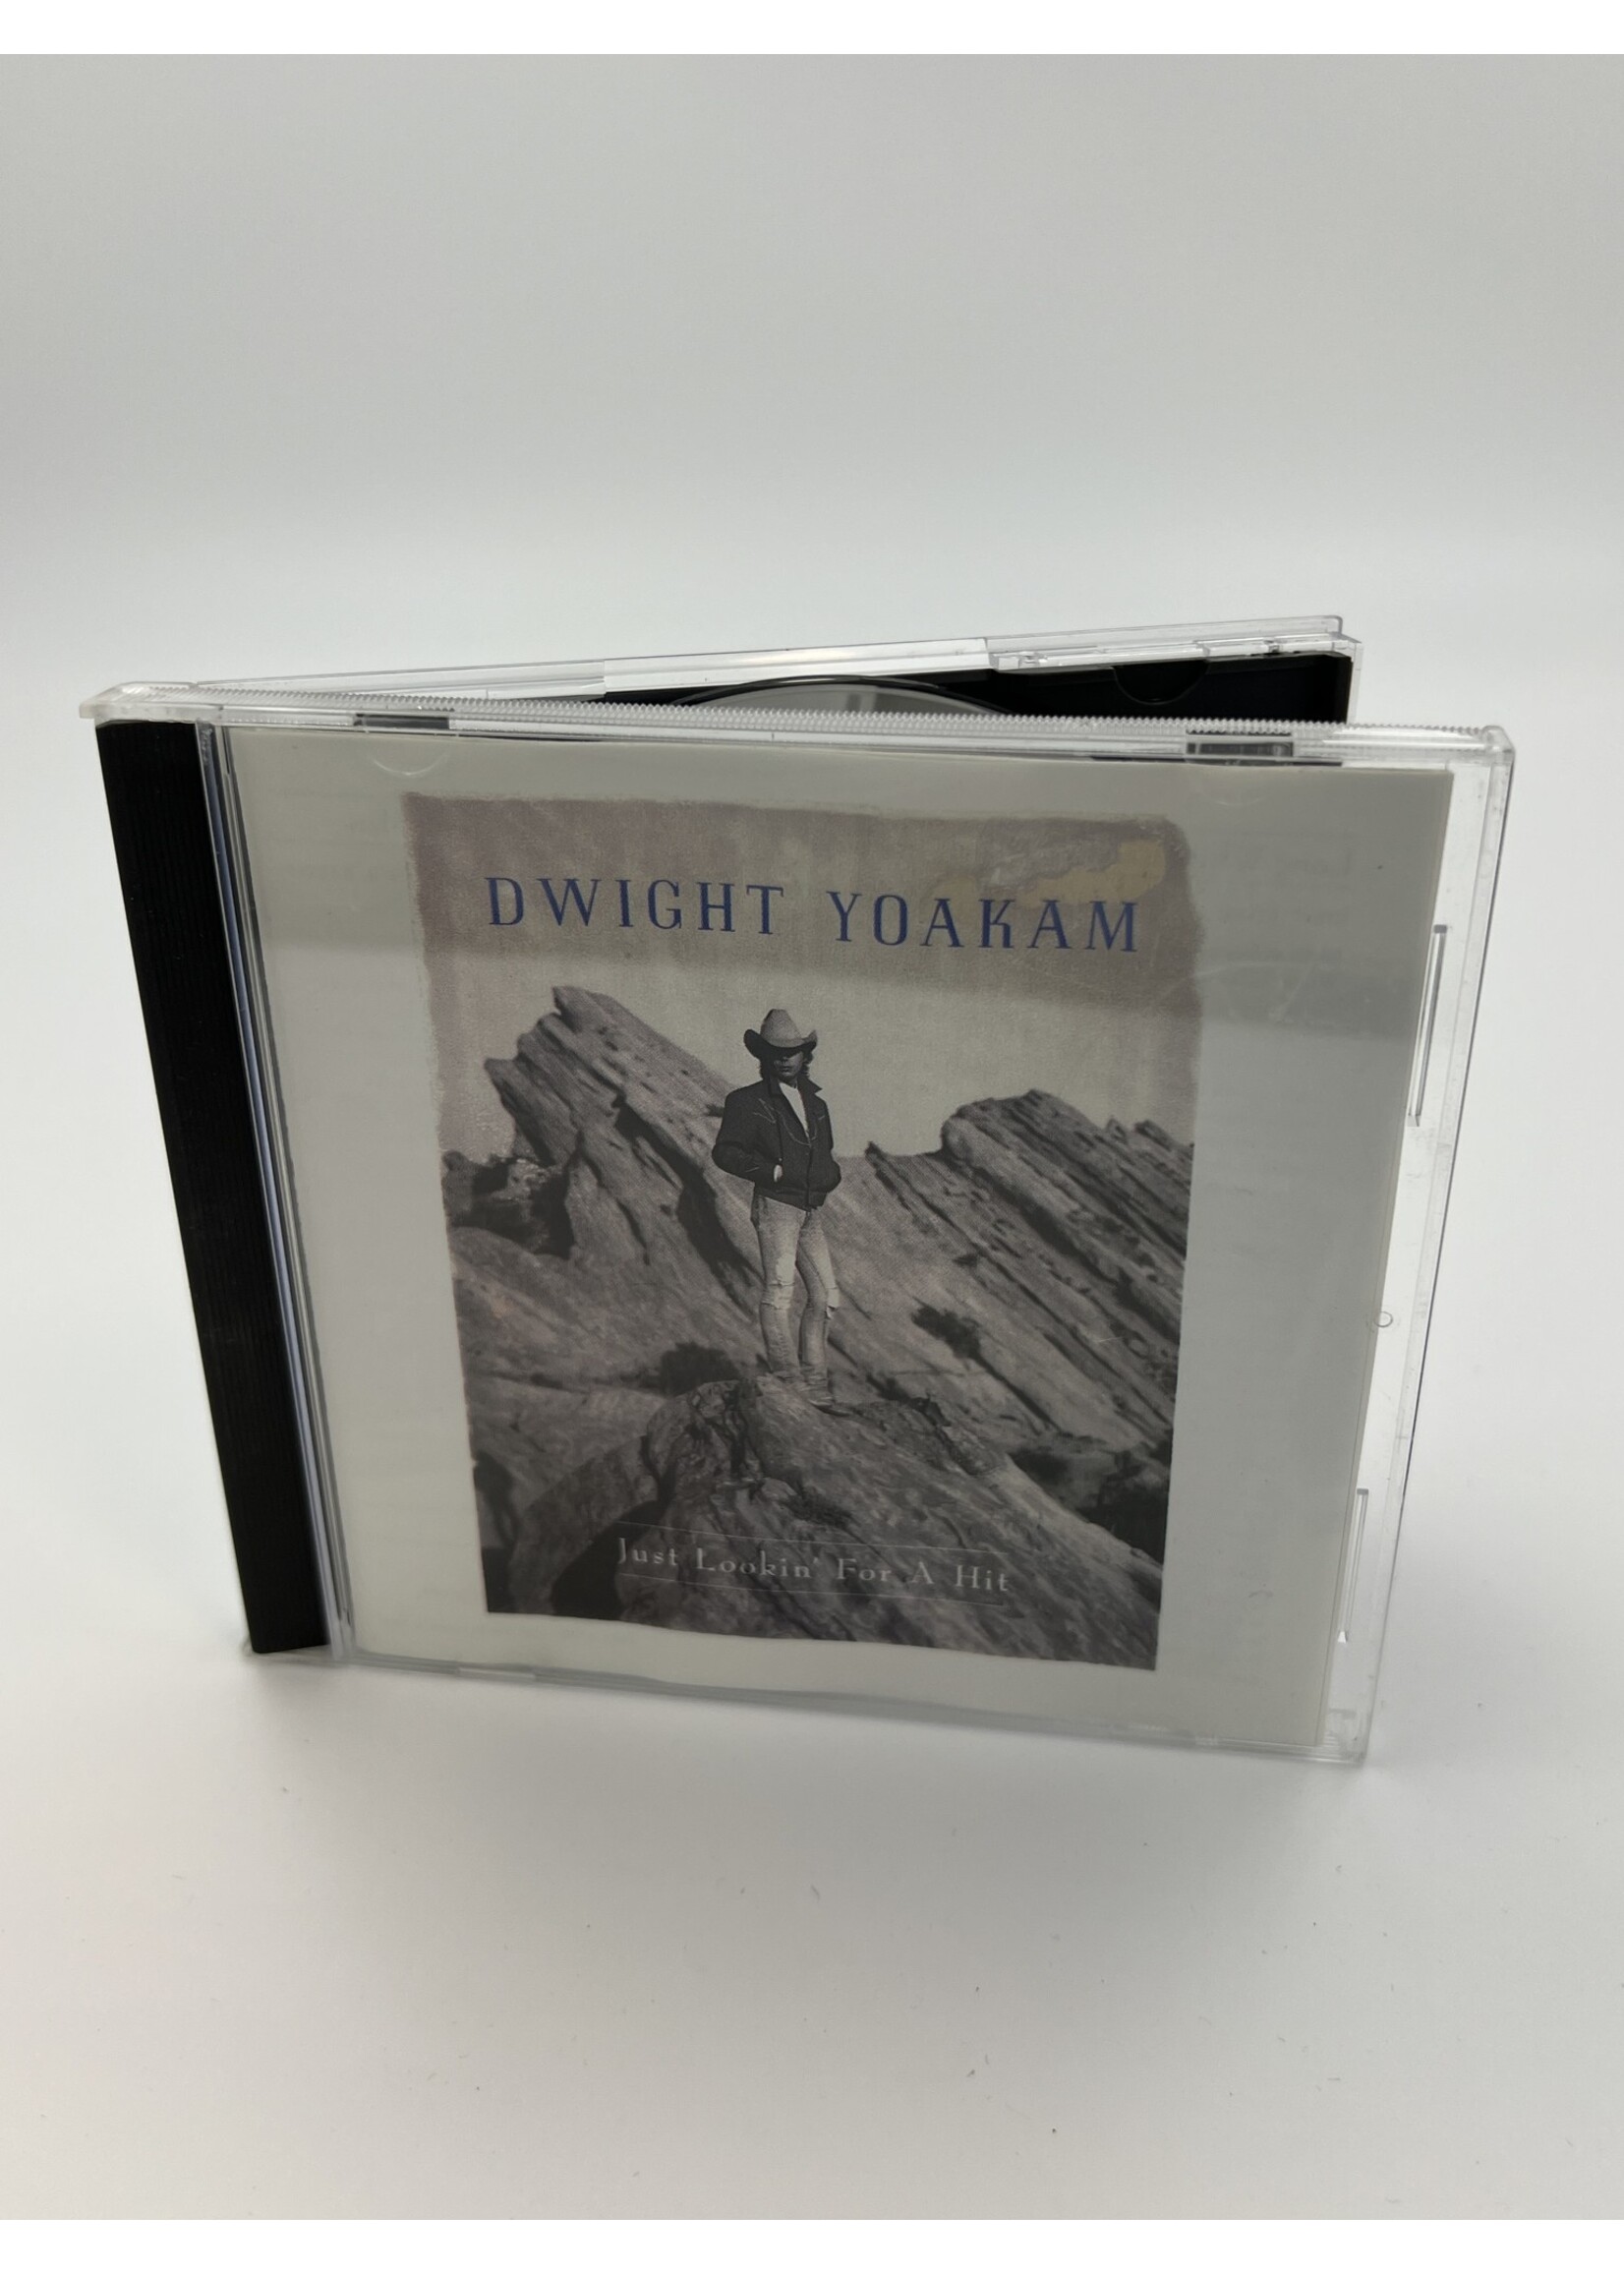 CD Dwight Yoakam Just Lookin For A Hit Cd